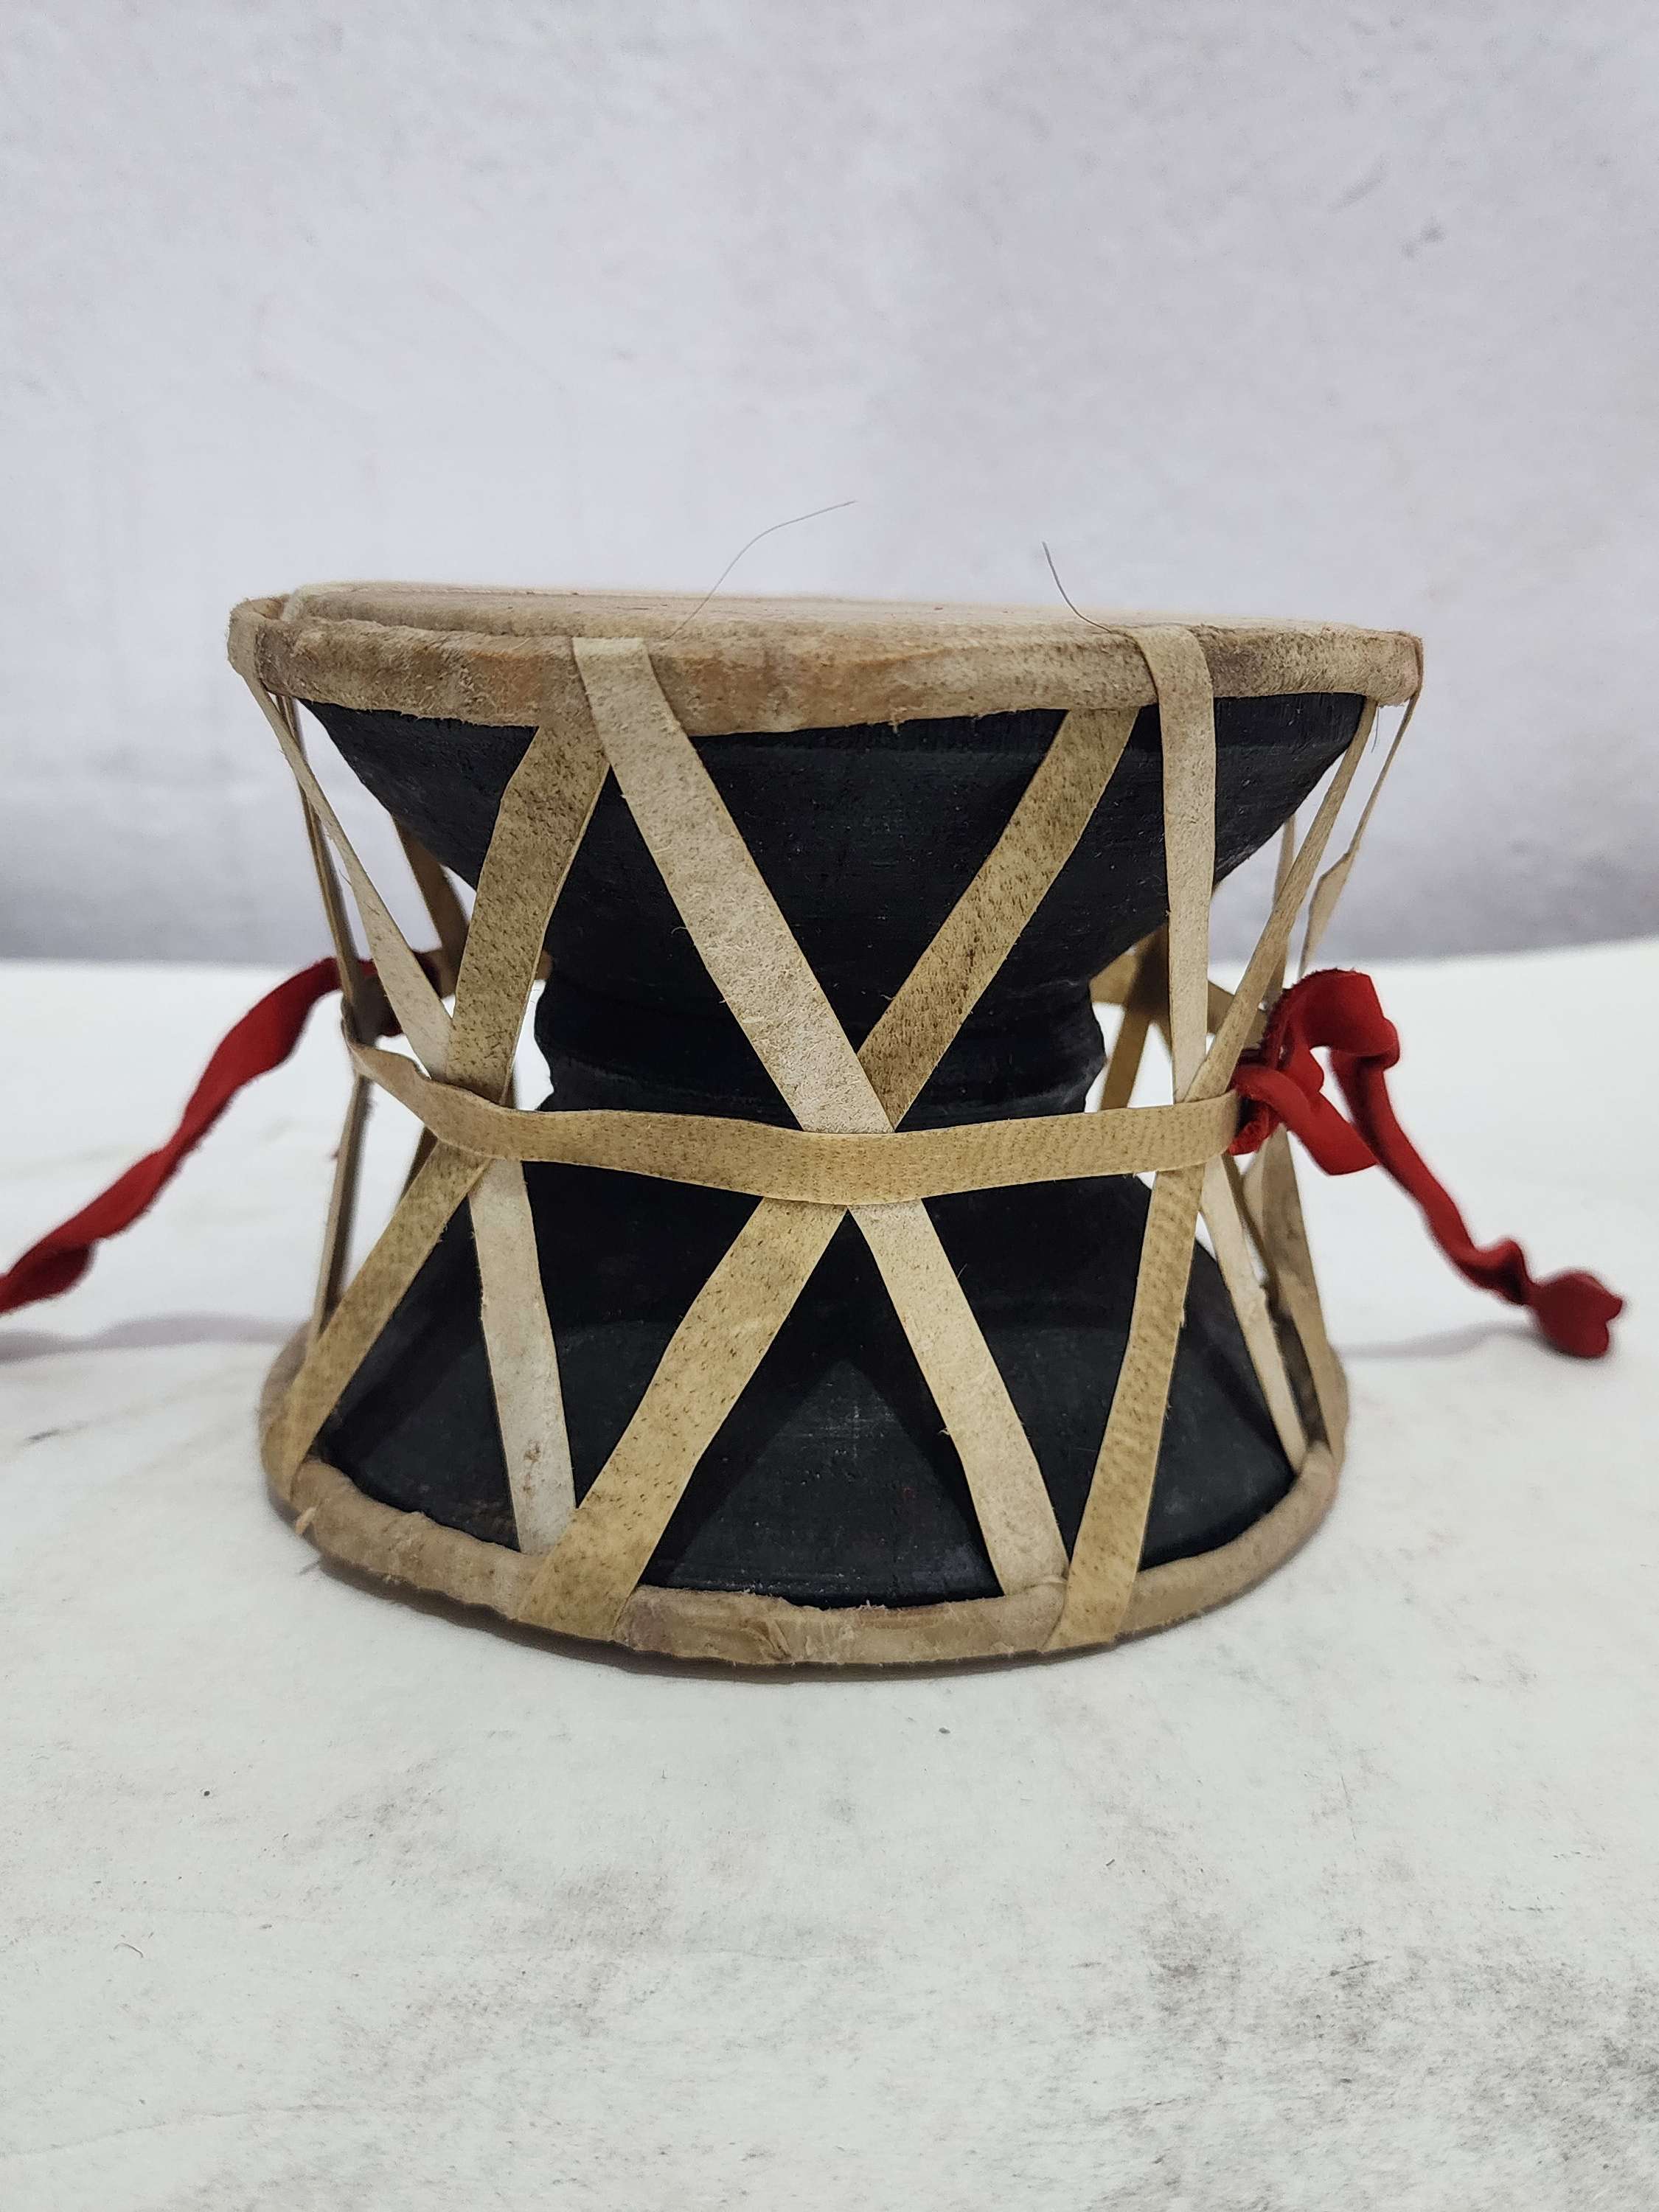 High Quality Nepali Folk Musical Instrument damaru, Musical Instrument To Many Religious Practice, Made On Copper Base